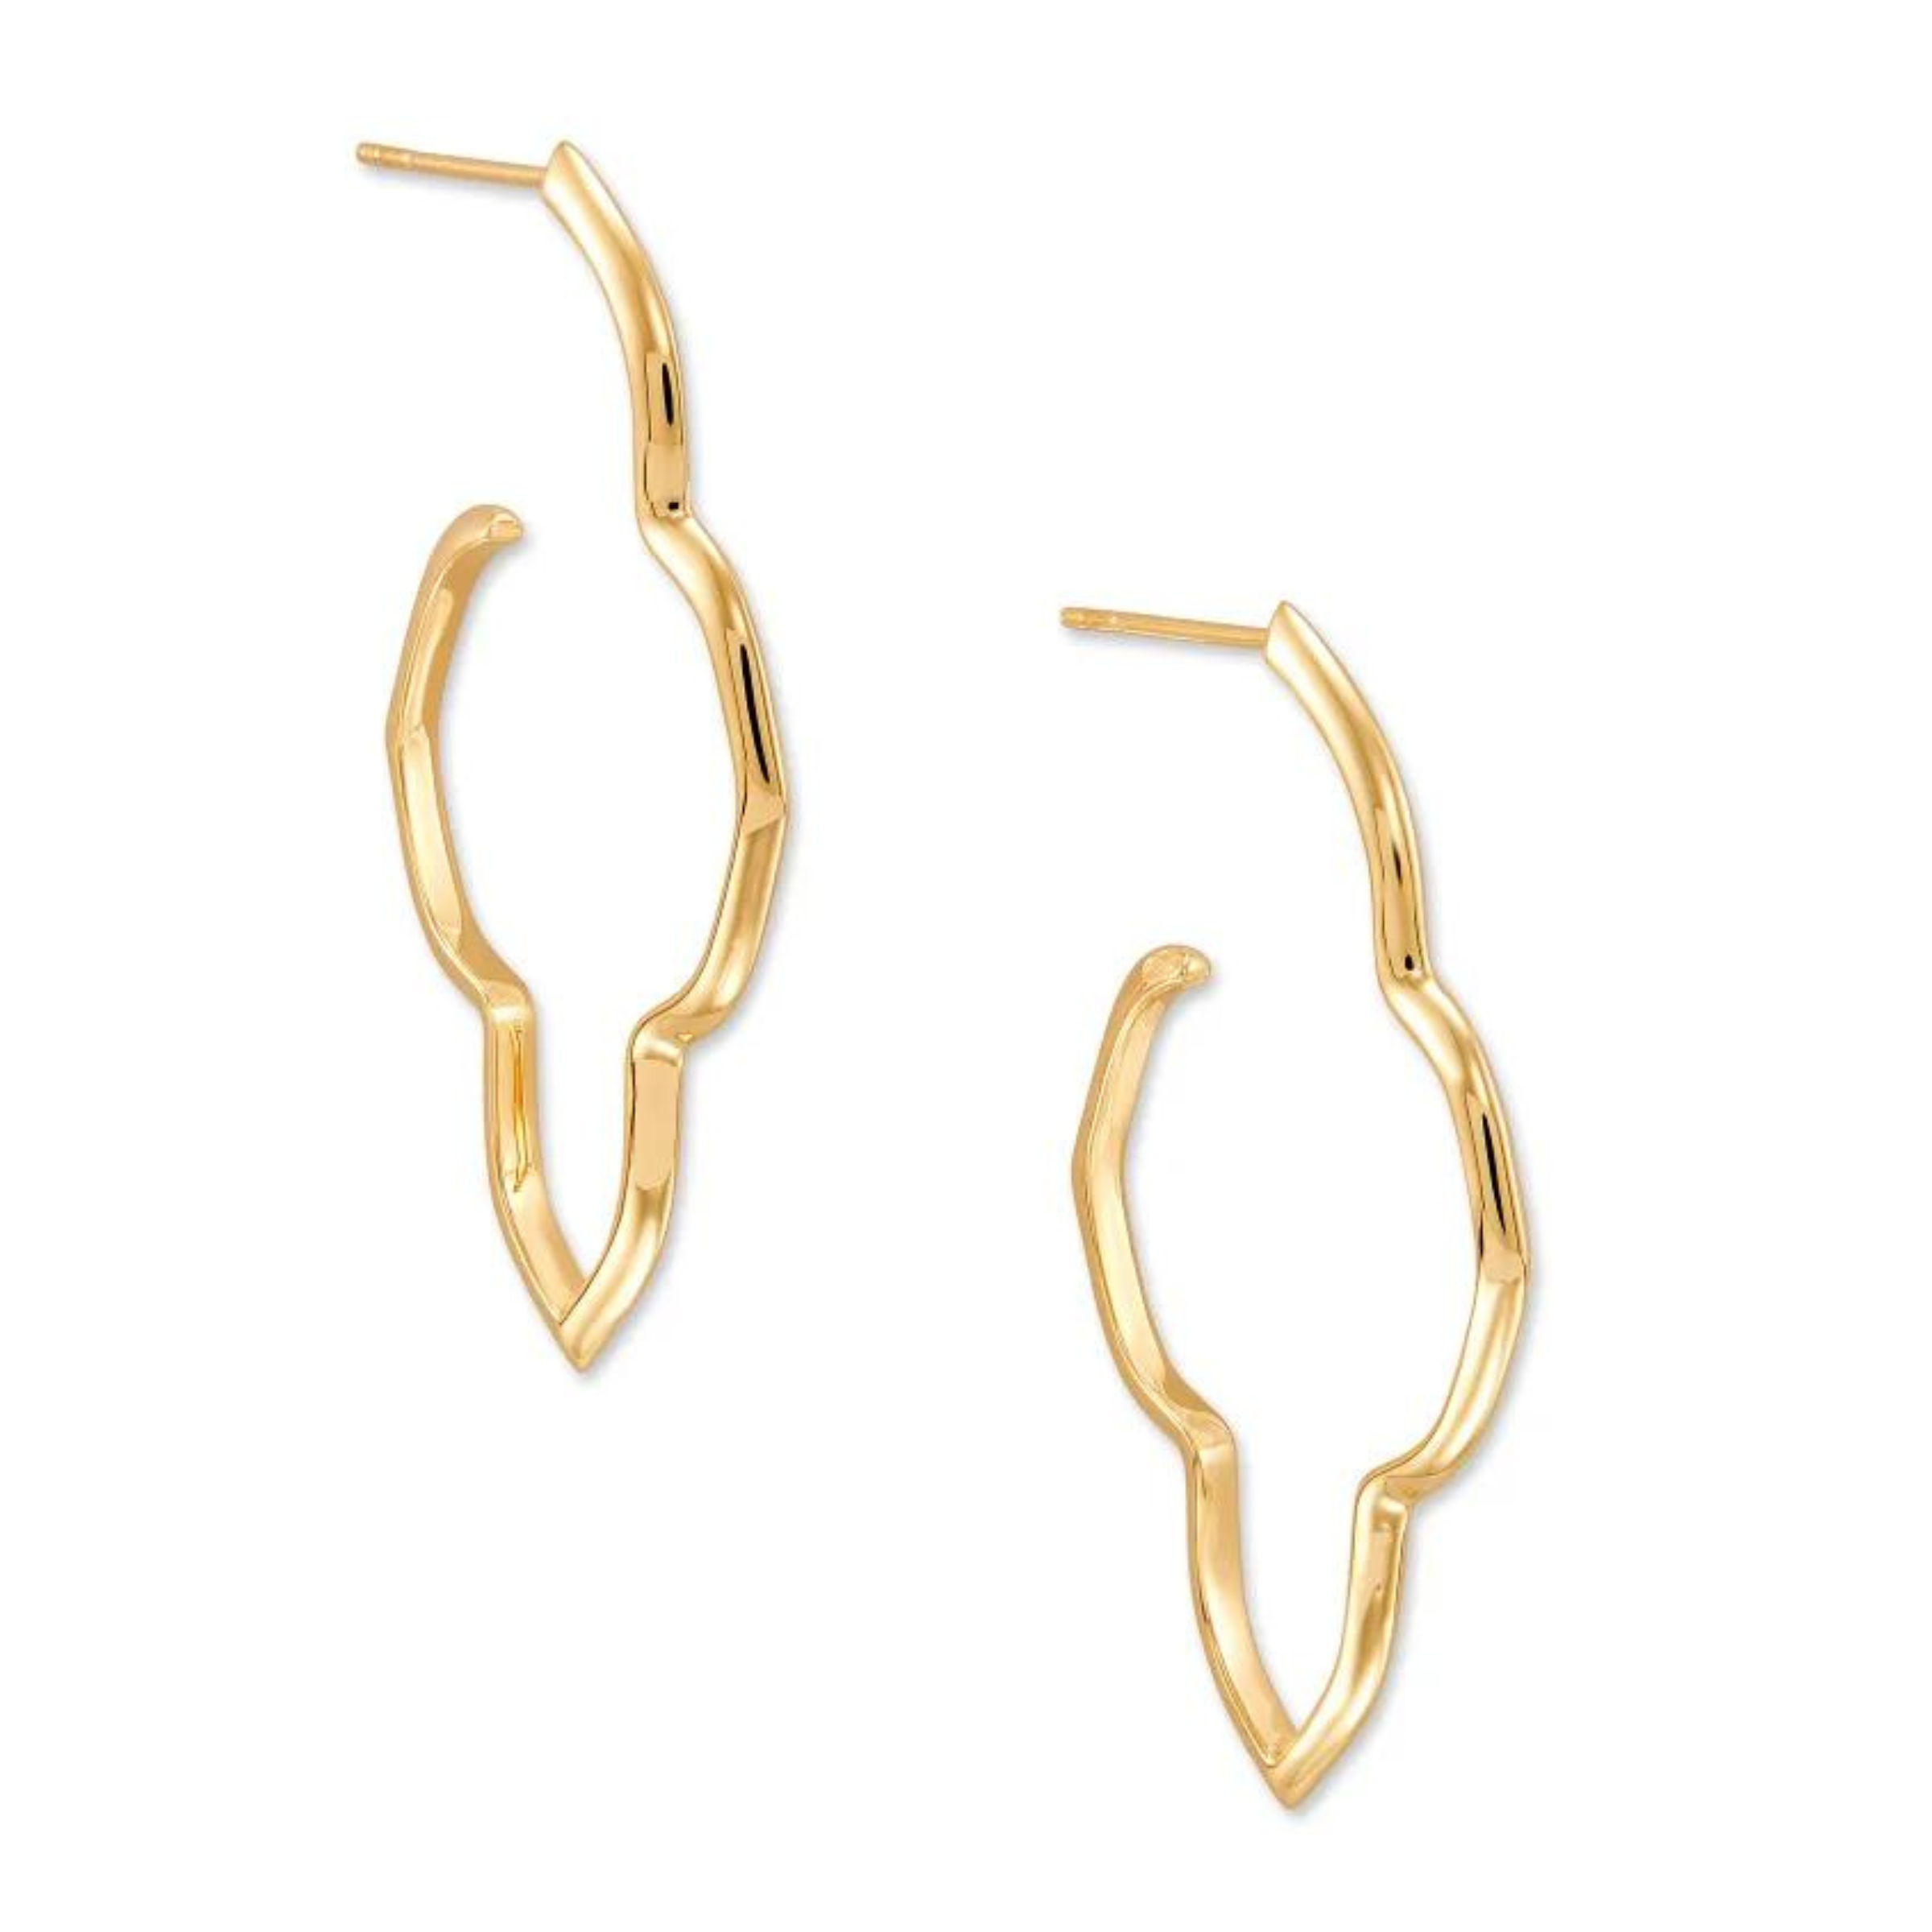 Gold Kendra Scott Medallion hoop earrings pictured on a white background. 